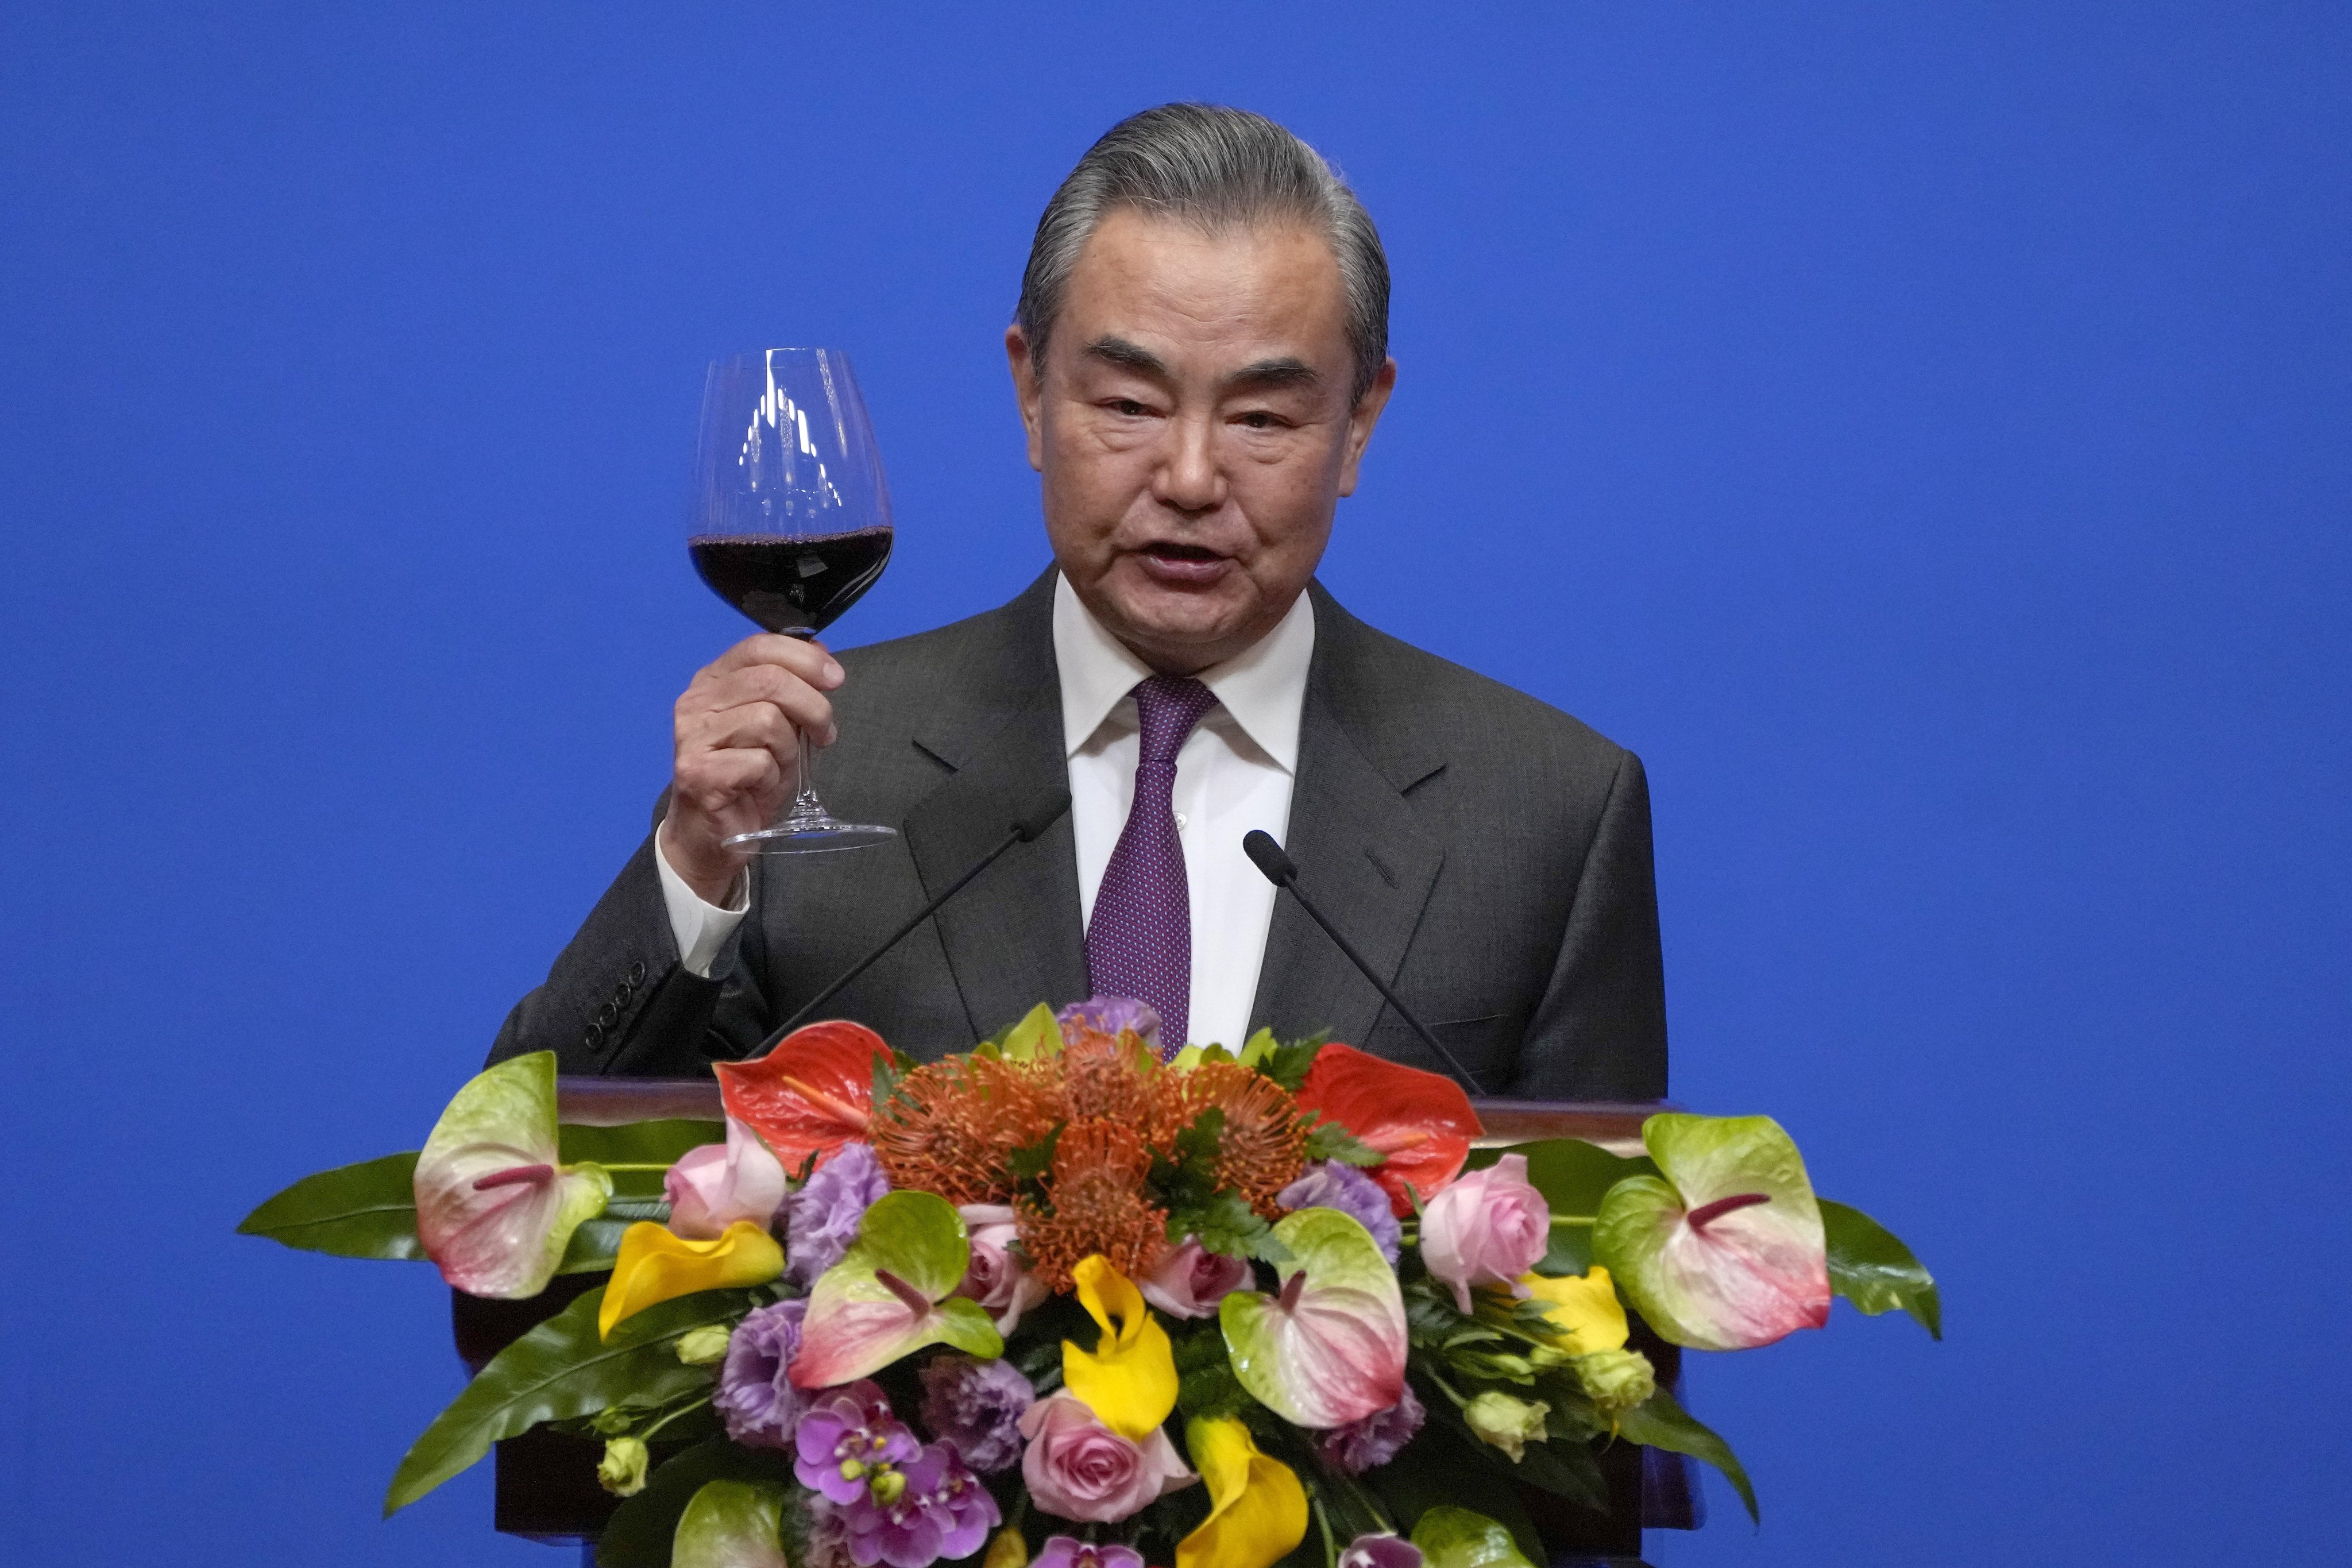 Chinese Foreign Minister Wang Yi gives a toast at a reception commemorating the 45th anniversary of China-US diplomatic ties in Beijing on Friday. Photo: EPA-EFE